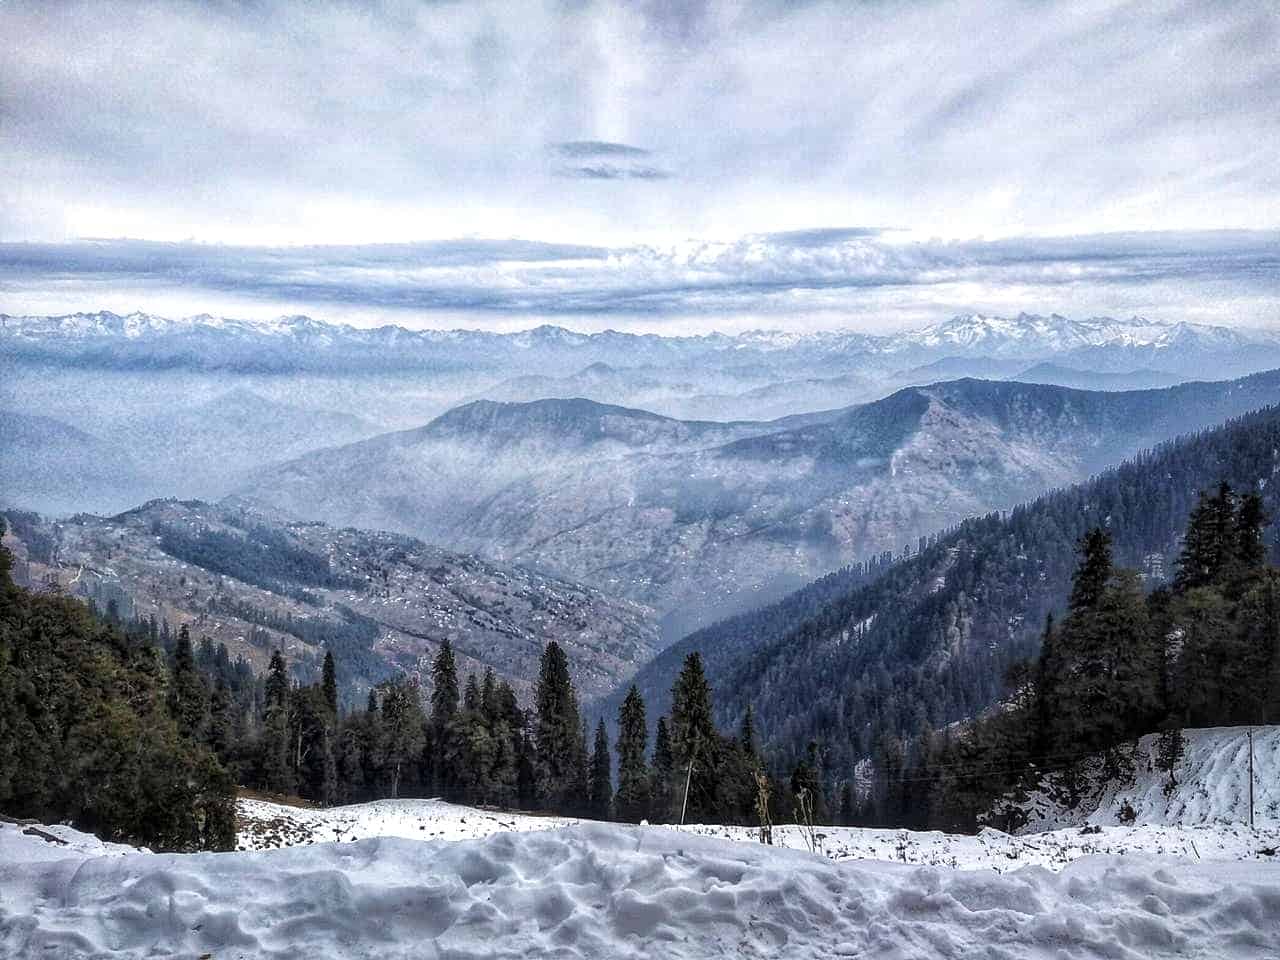 Hatu-Peak-is-the-highest-peak-in-the-whole-of-Shimla-perched-at-a-dizzying-height-of-12000-feet-it-is-a-must-visit-for-everybody